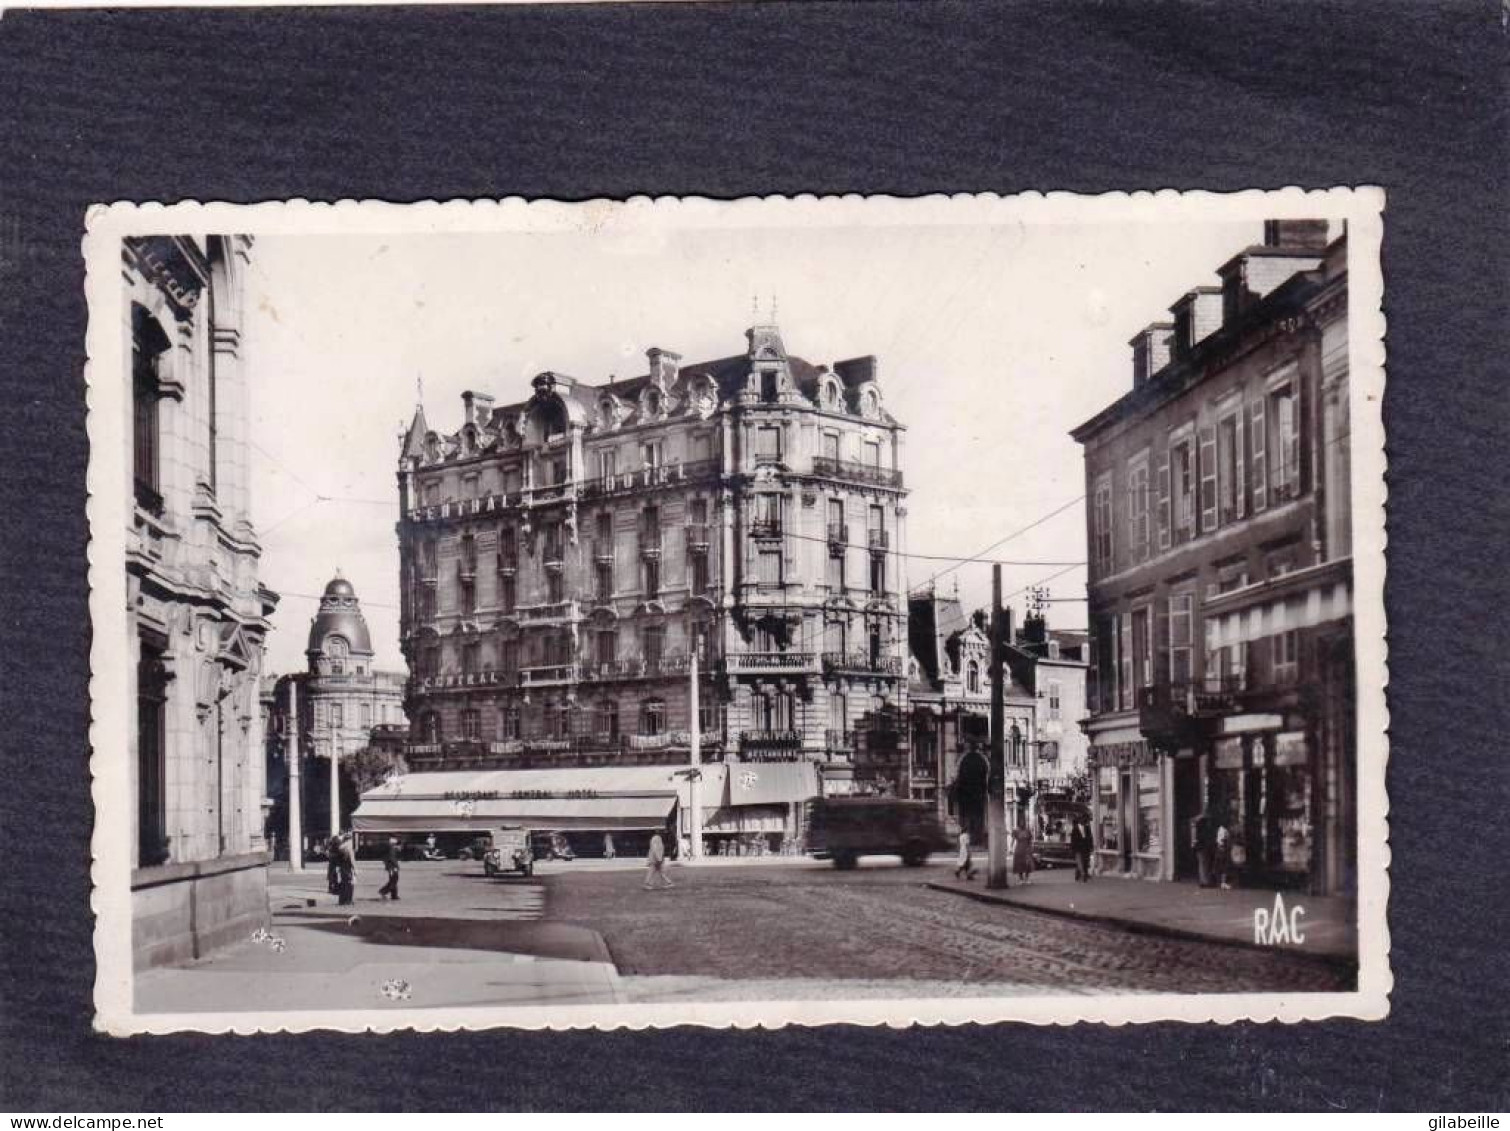 87 - Haute Vienne -  LIMOGES -  Carrefour Tourny - Central Hotel - Limoges